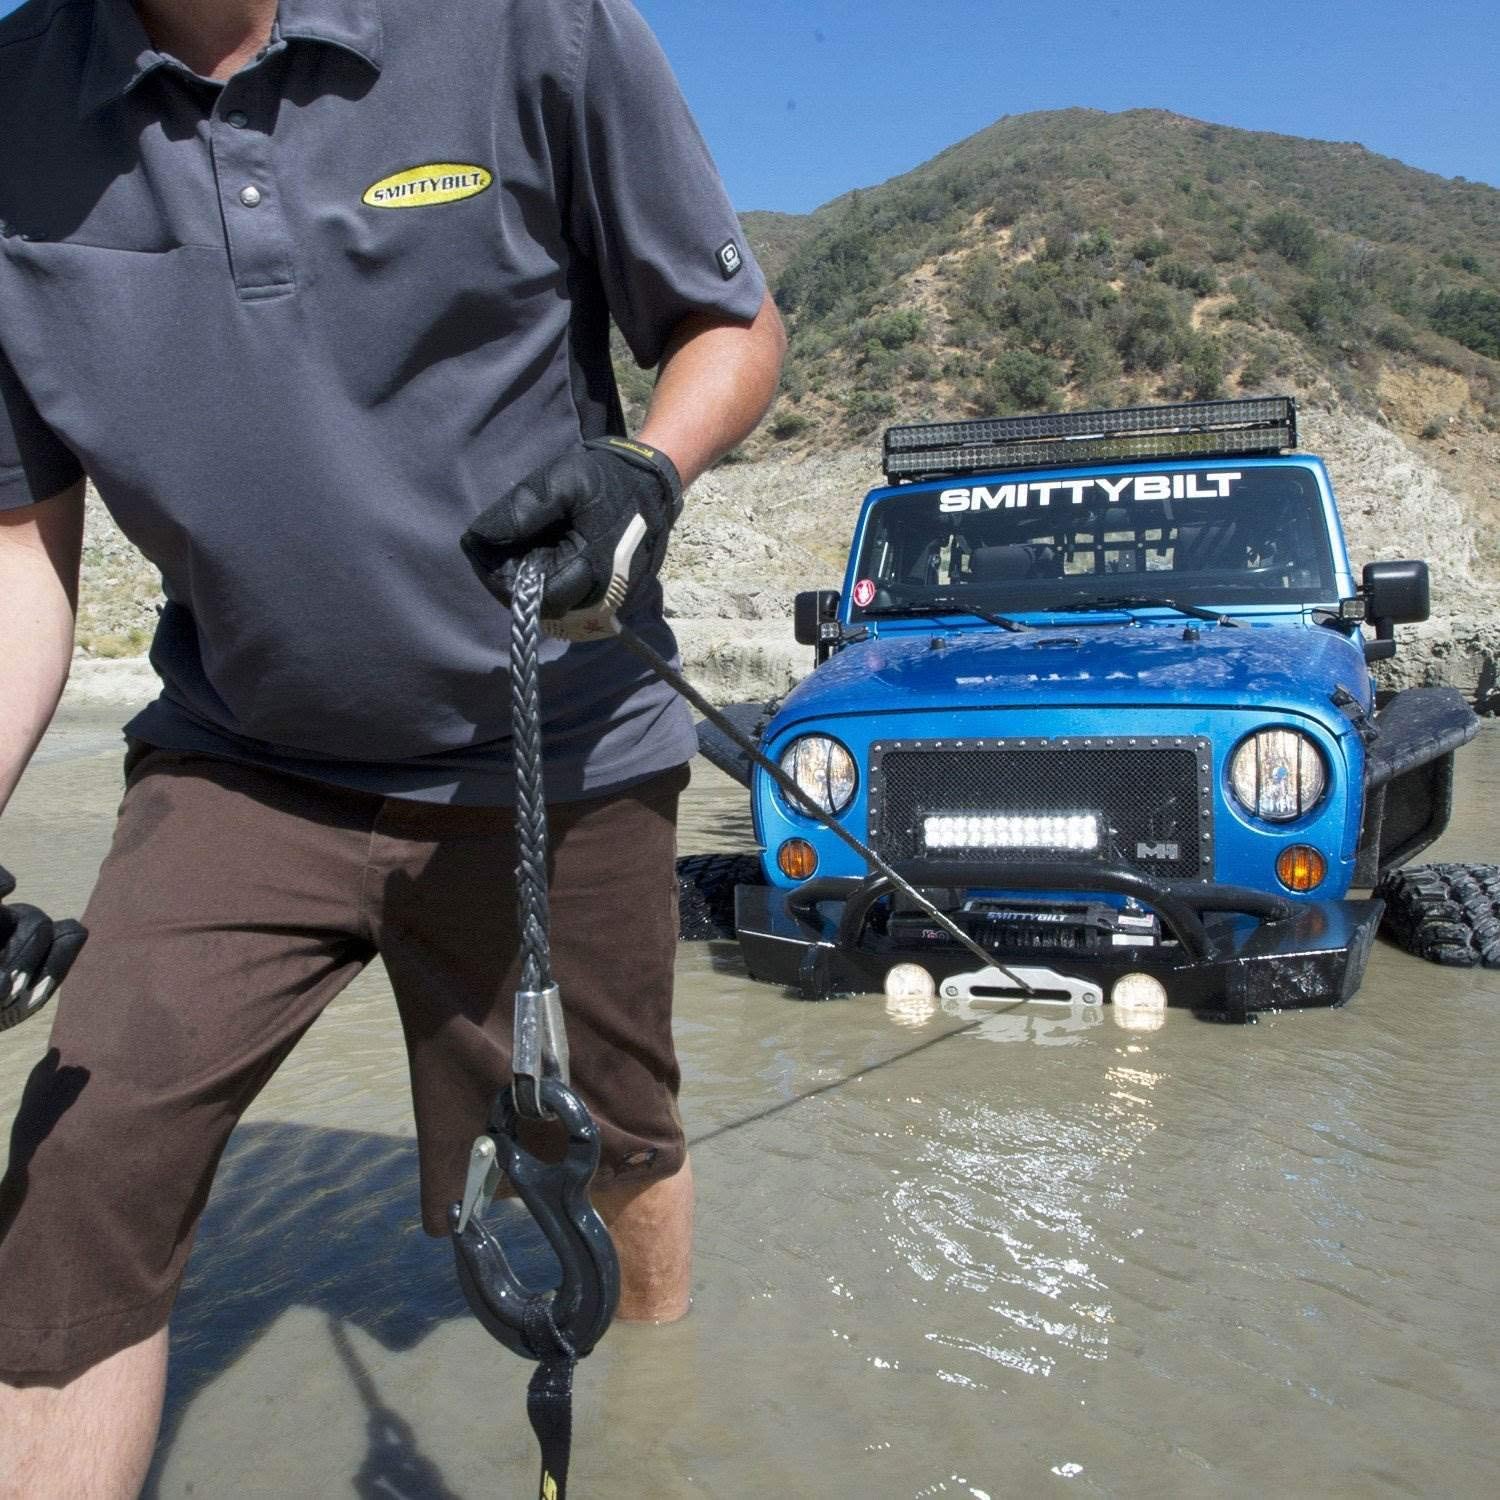 Smittybilt Winch Review: Which is the Best Winch Option for You?